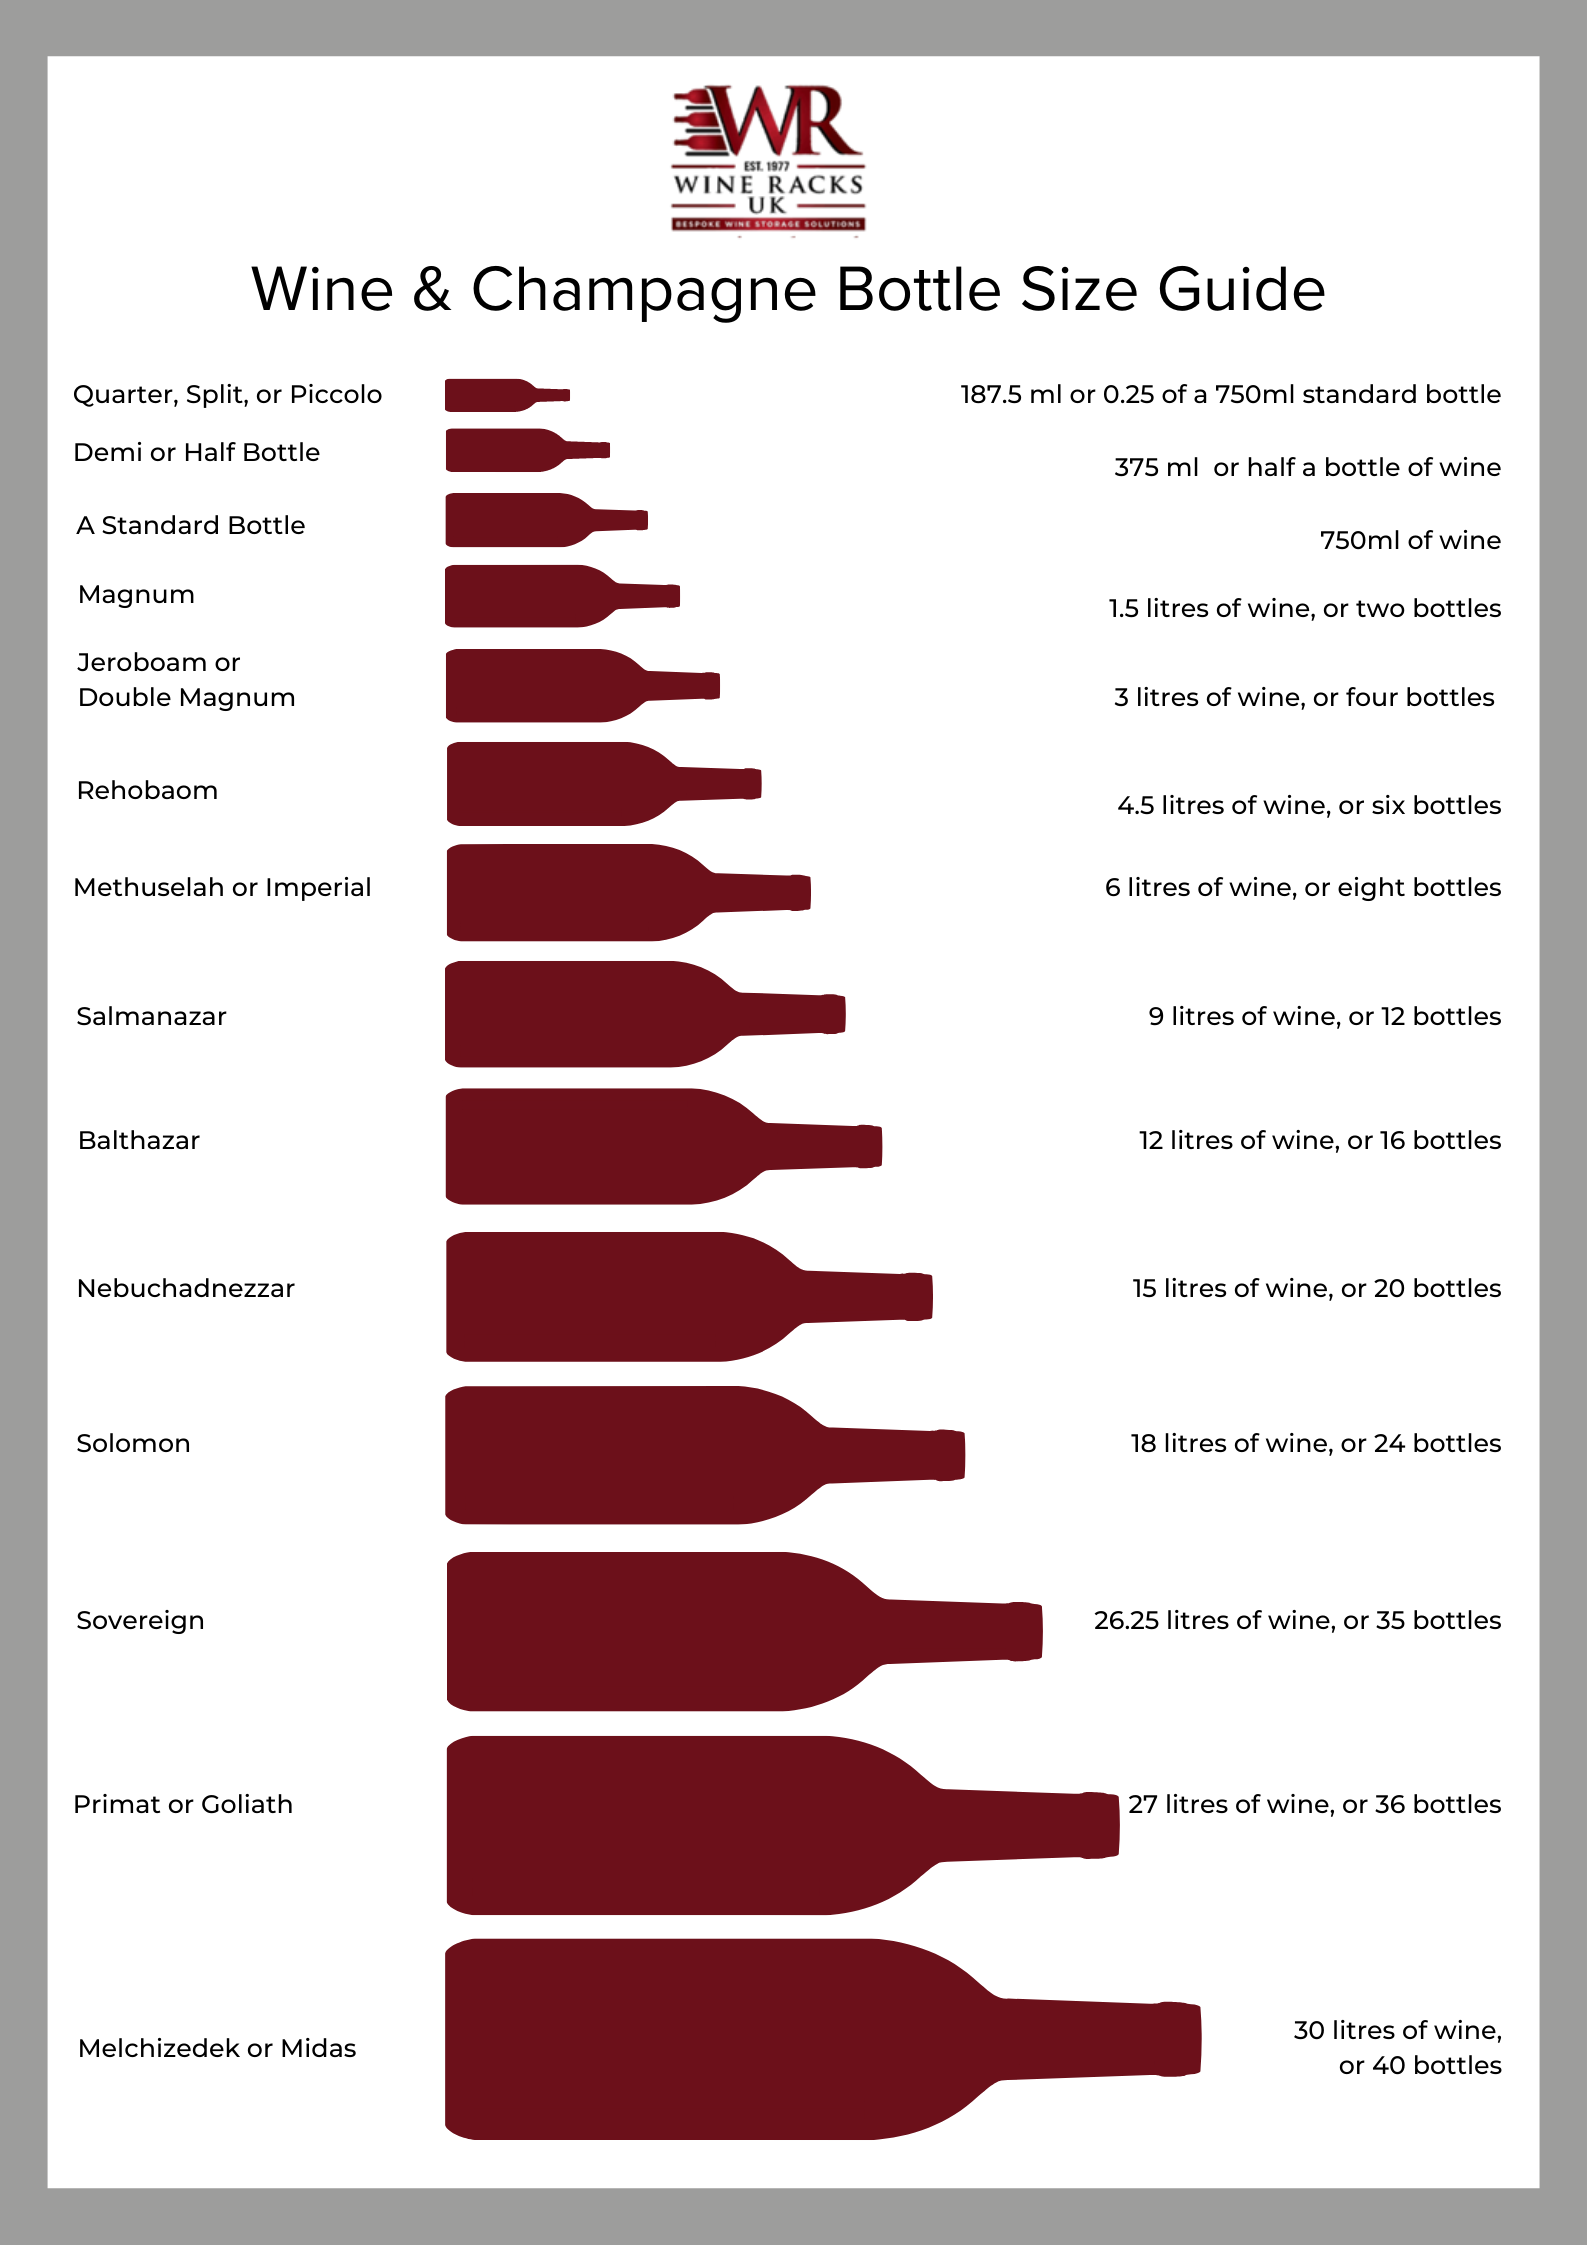 wine and champagne bottle size guide chart: sizes range from a Quarter to a Midas which holds 30 litres of wine.